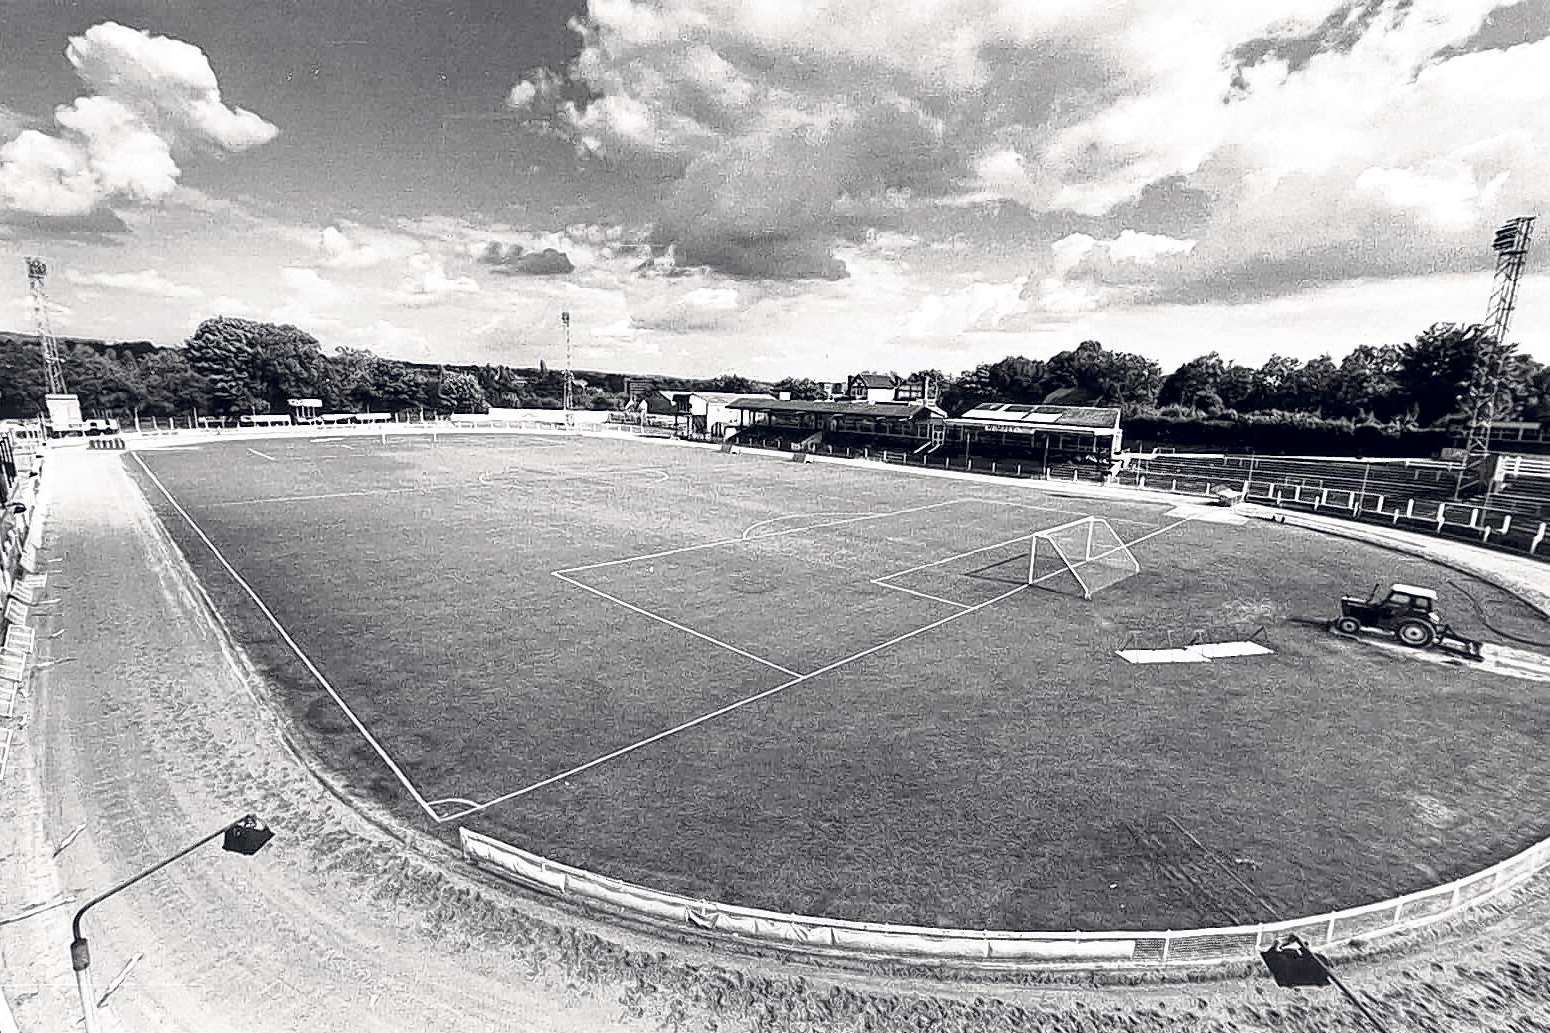 Maidstone moved out of their old London Road ground in 1988